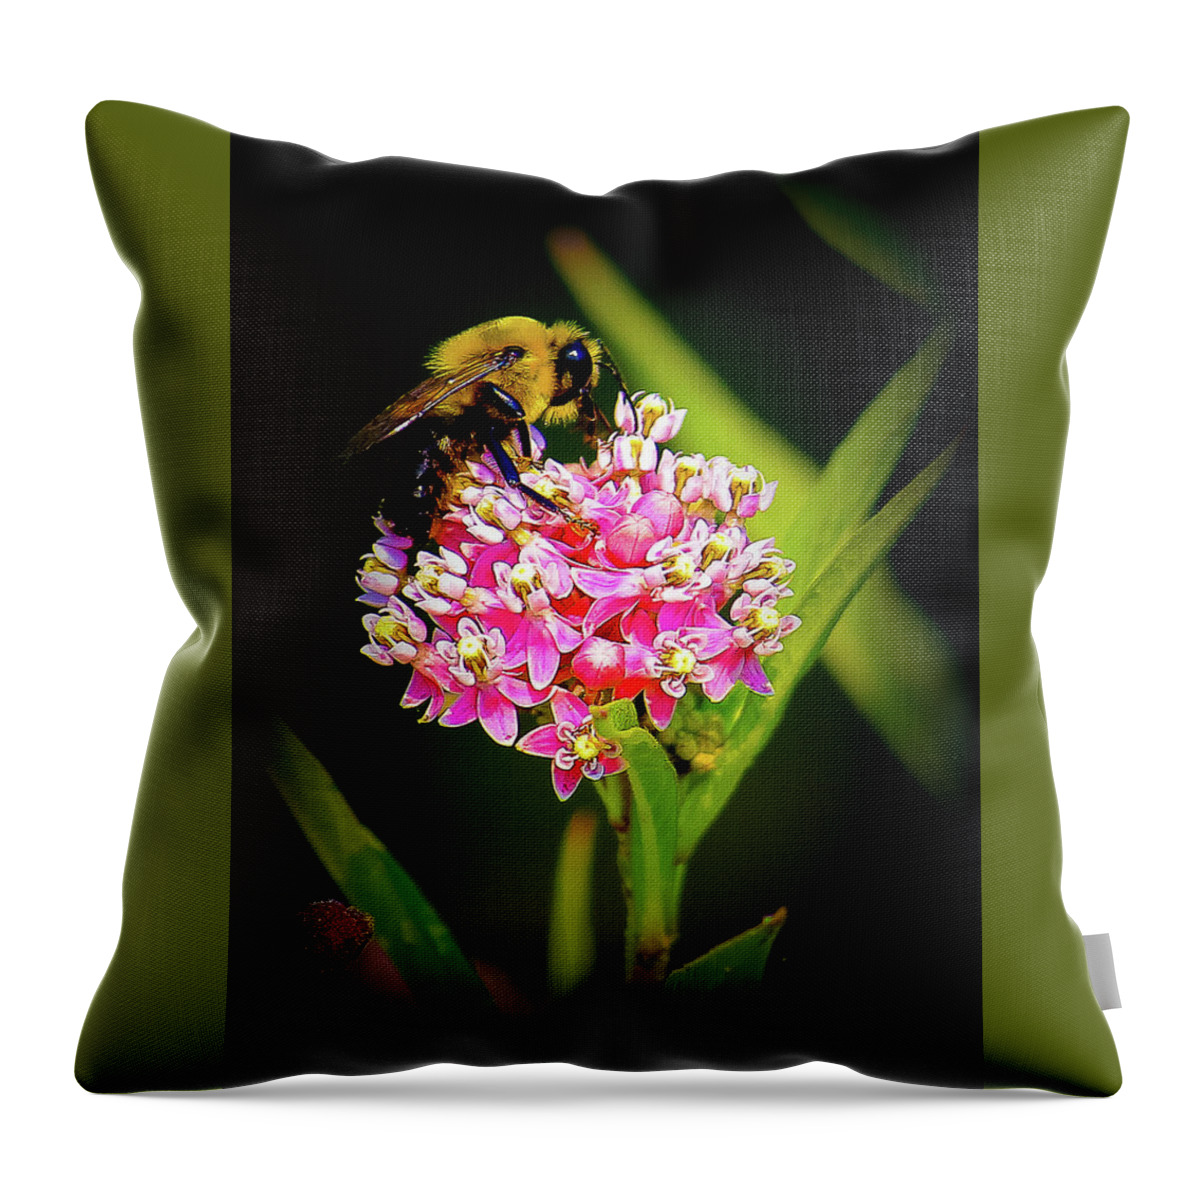 Bee Throw Pillow featuring the photograph Bee by Tony HUTSON